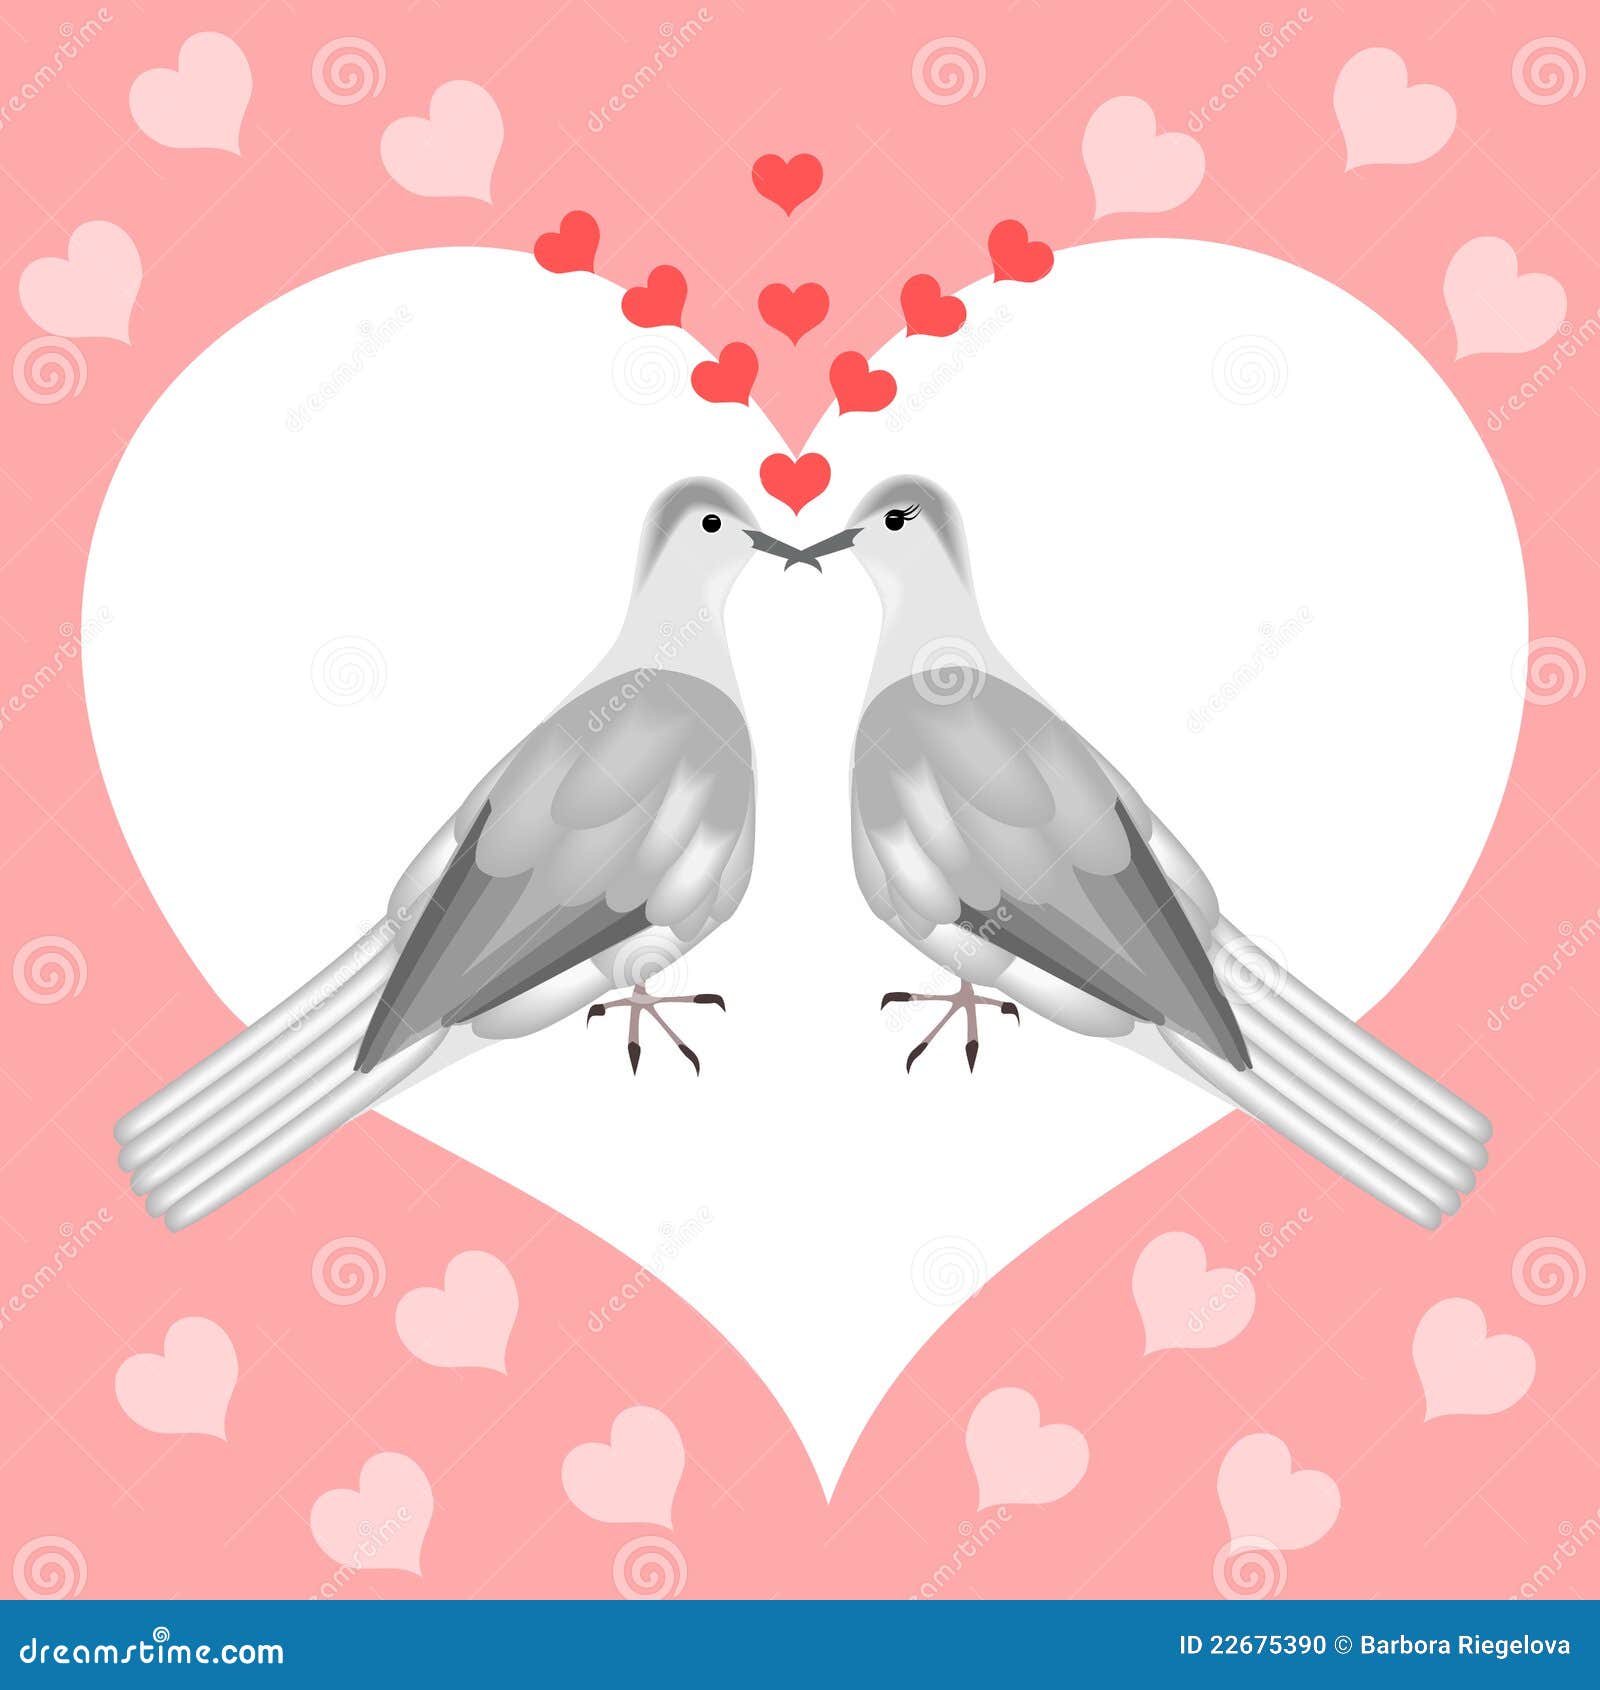 free clipart two turtle doves - photo #32